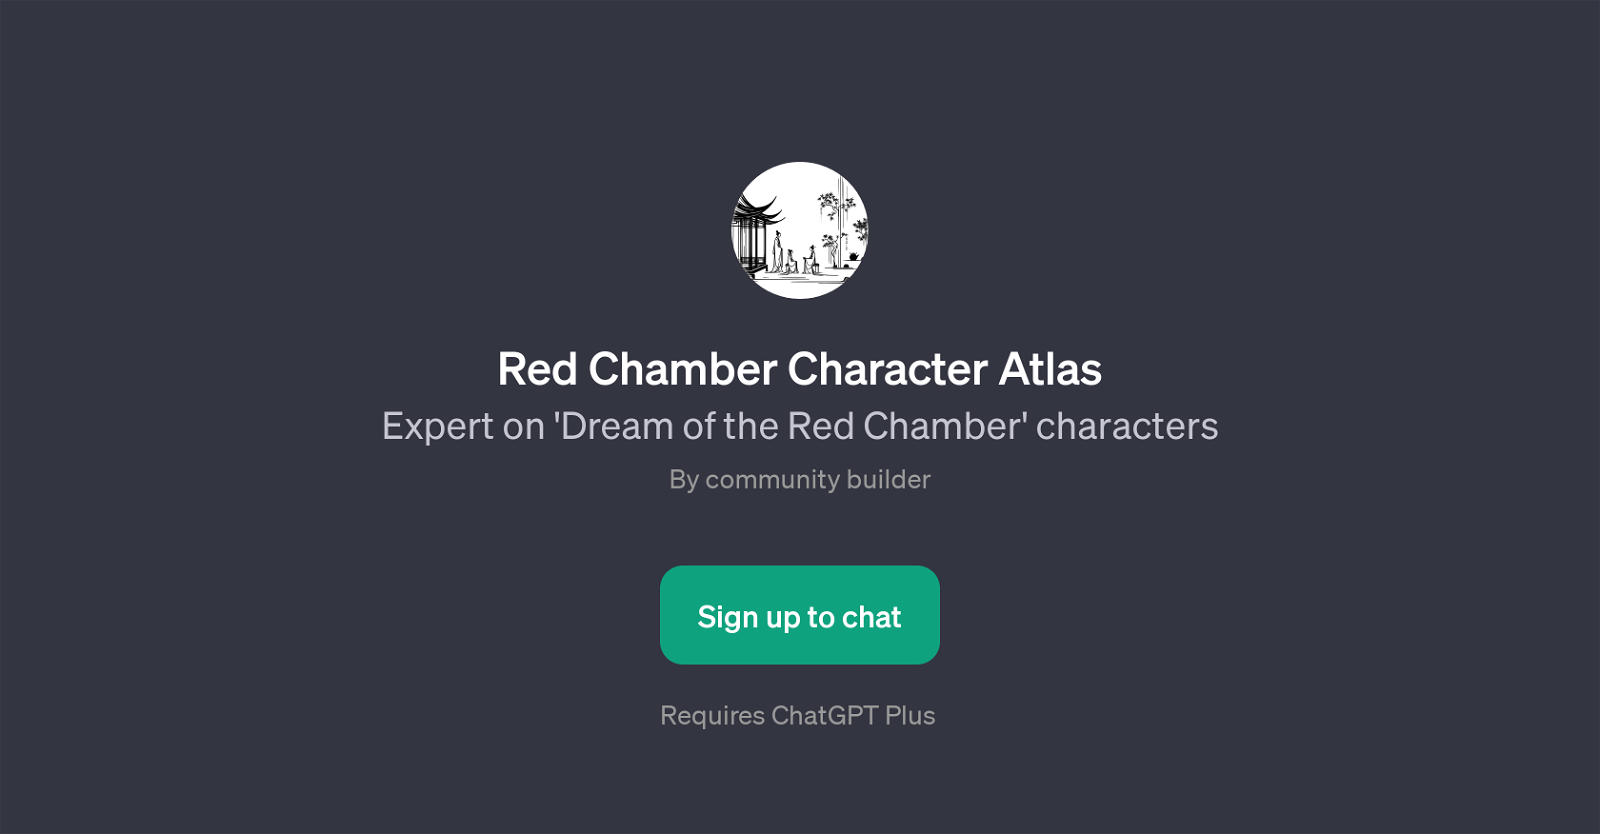 Red Chamber Character Atlas website